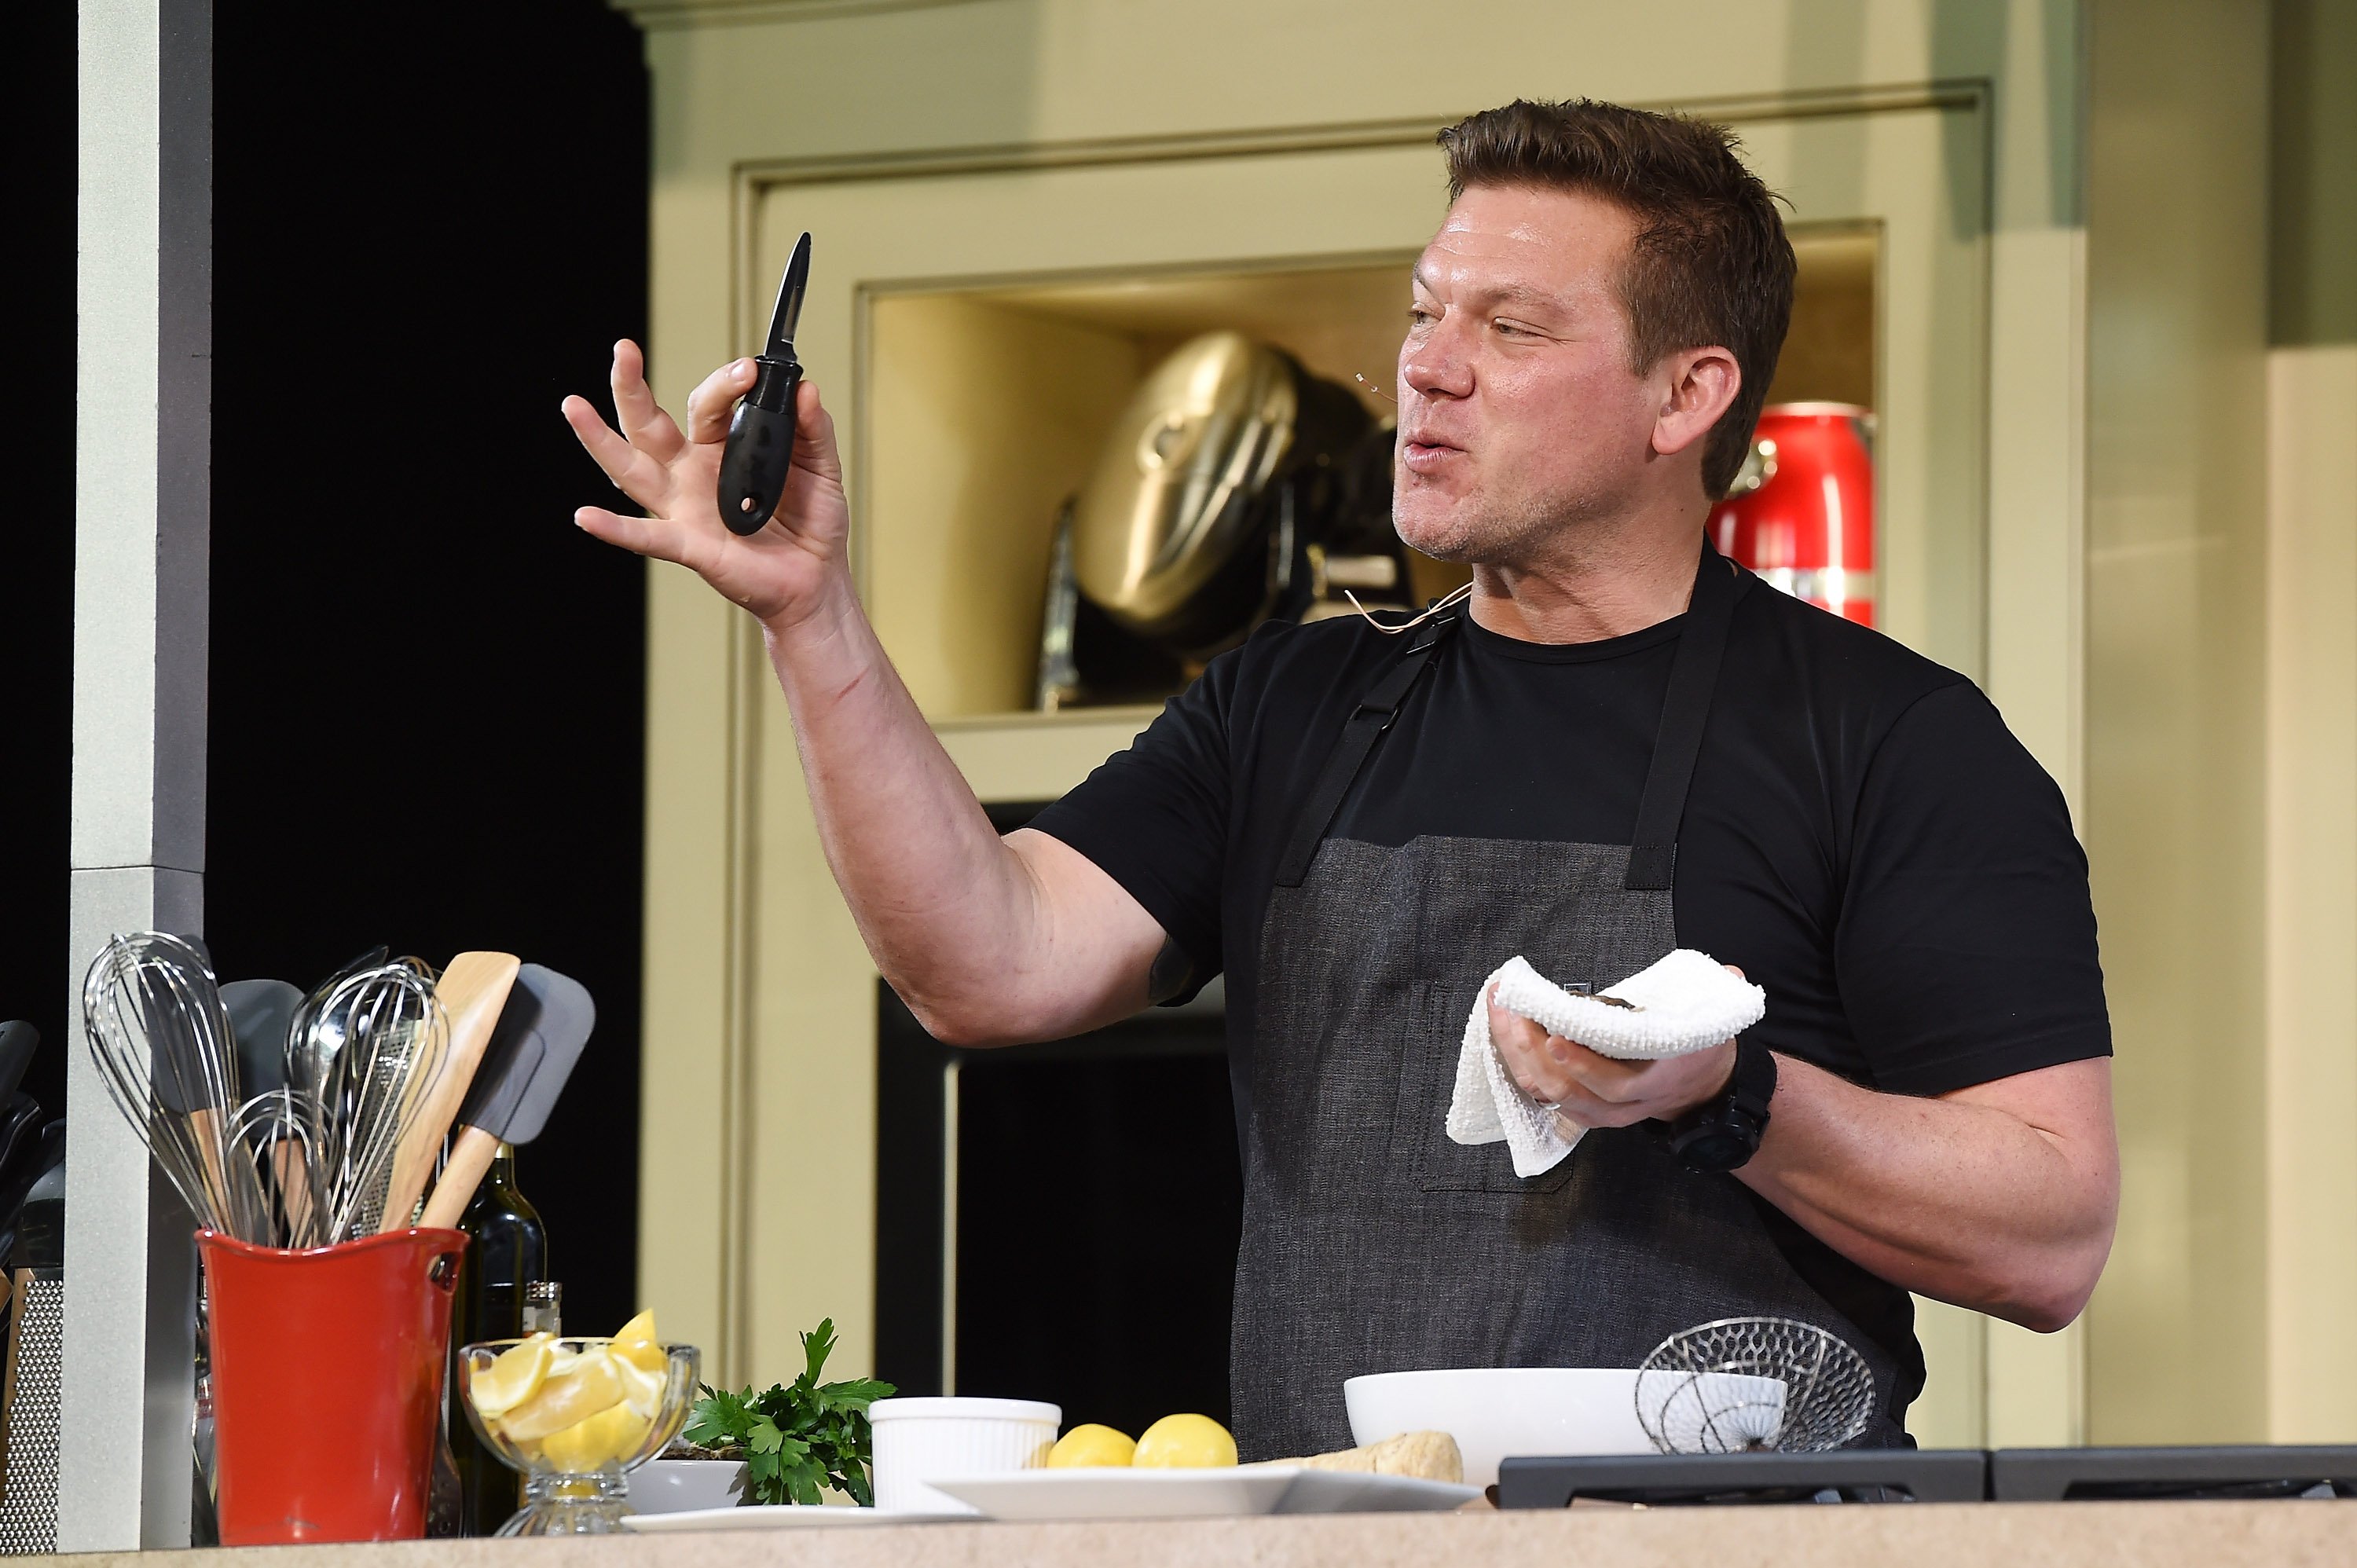 Food Network personality Tyler Florence wears a black tee in this photograph.